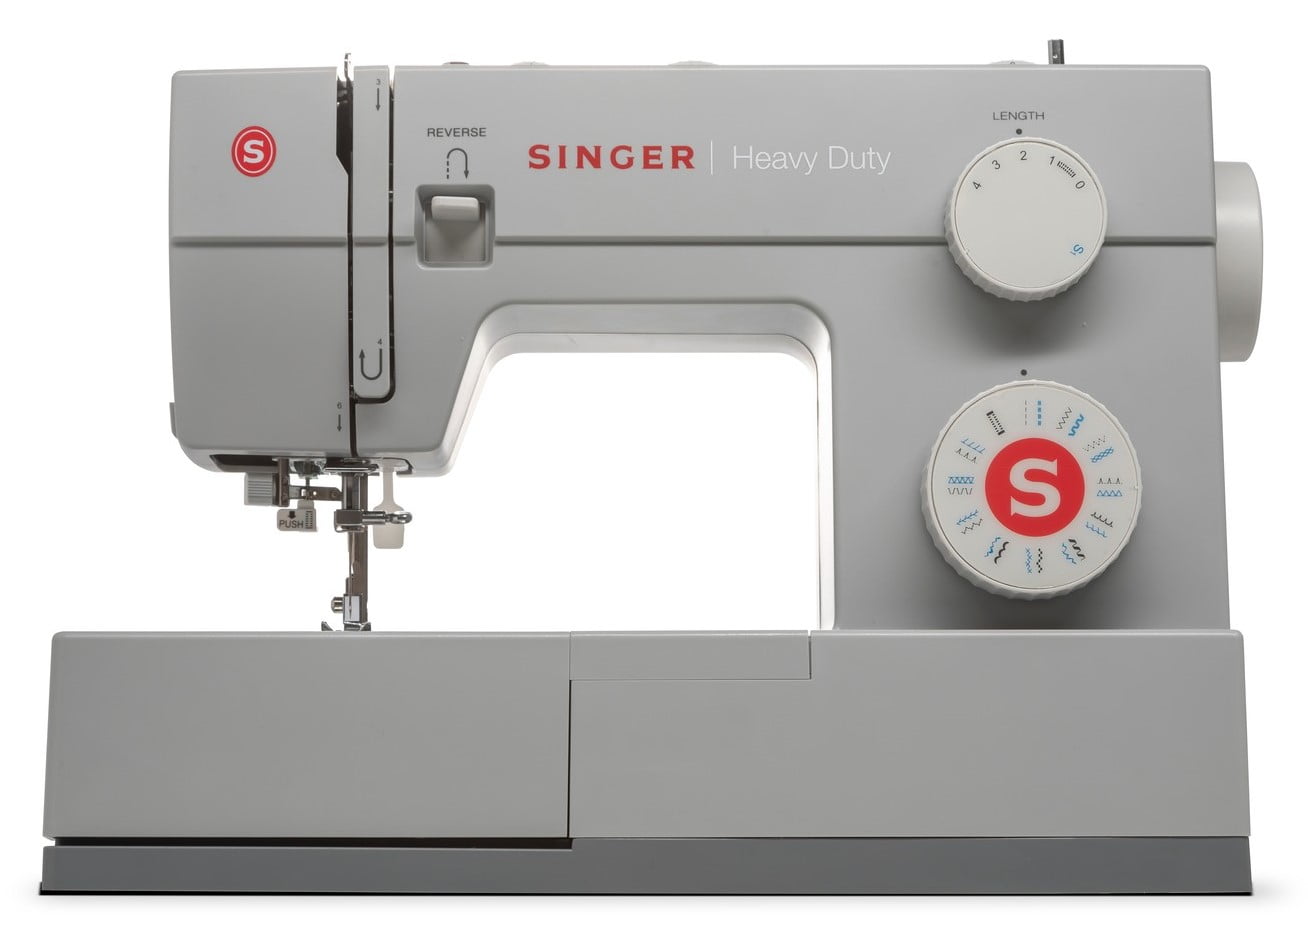 Sewing Machines in Arts Crafts and Sewing picture